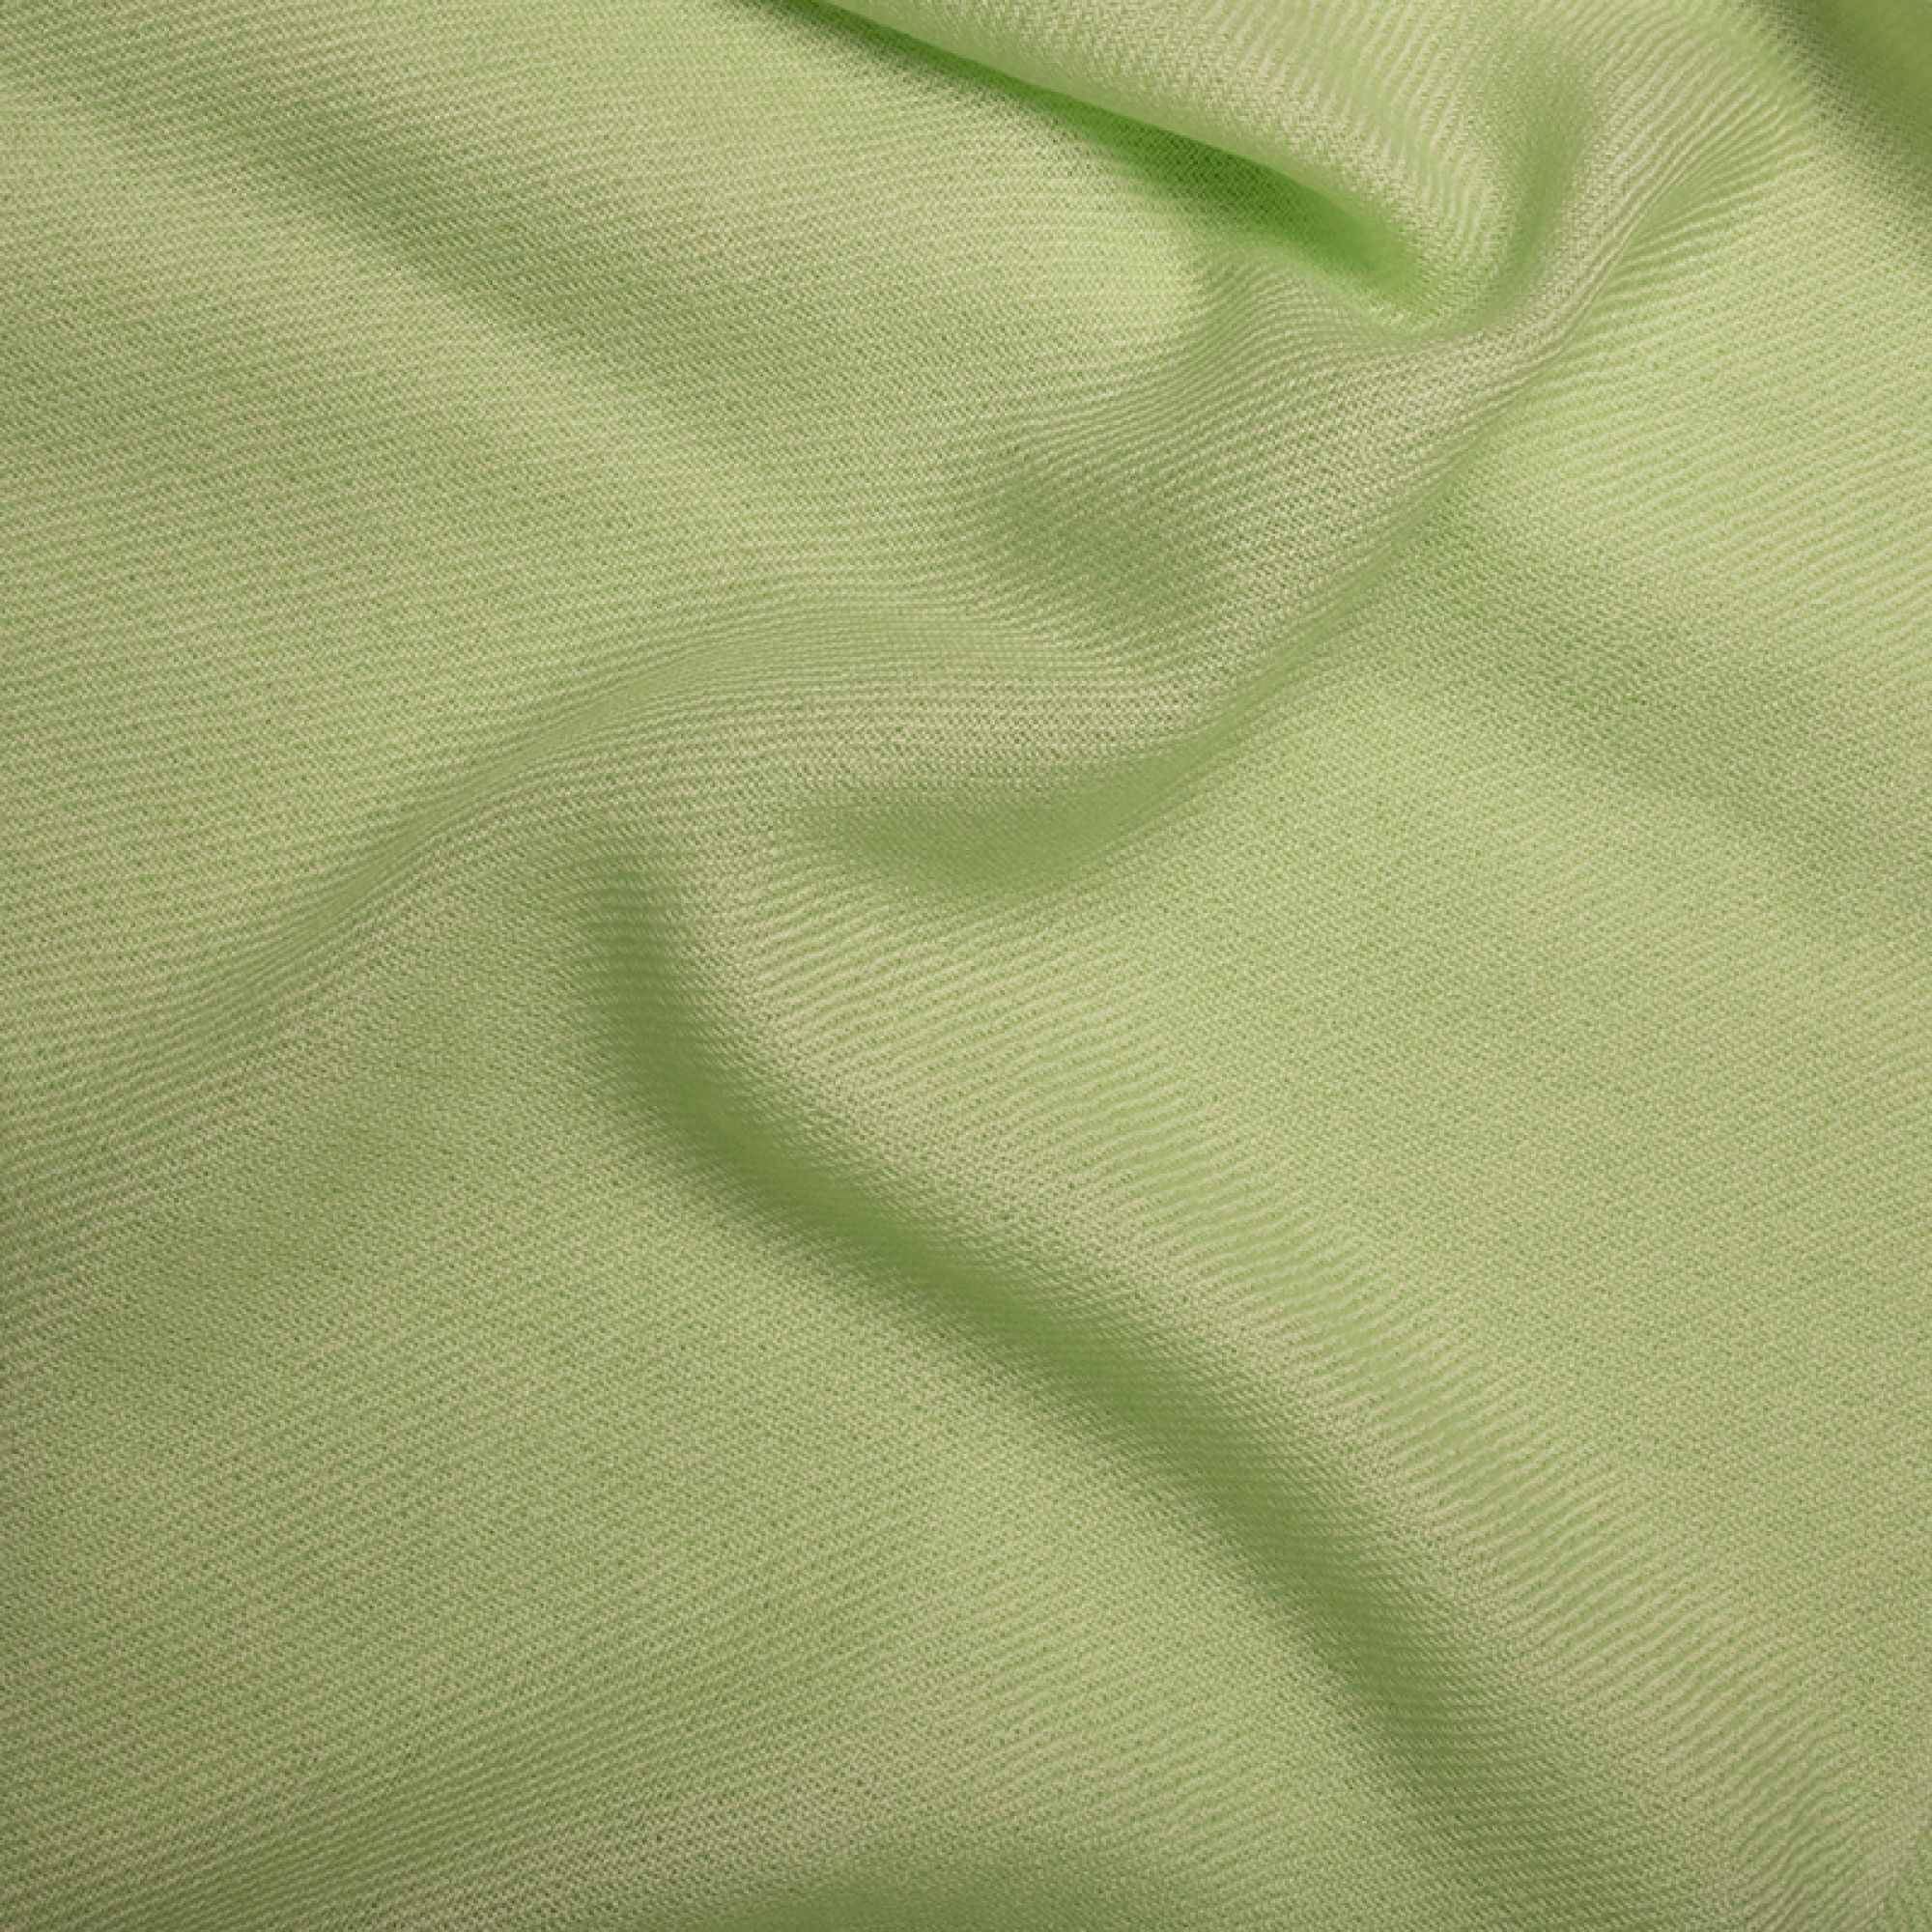 Cashmere accessories exclusive toodoo plain s 140 x 200 lime green 140 x 200 cm